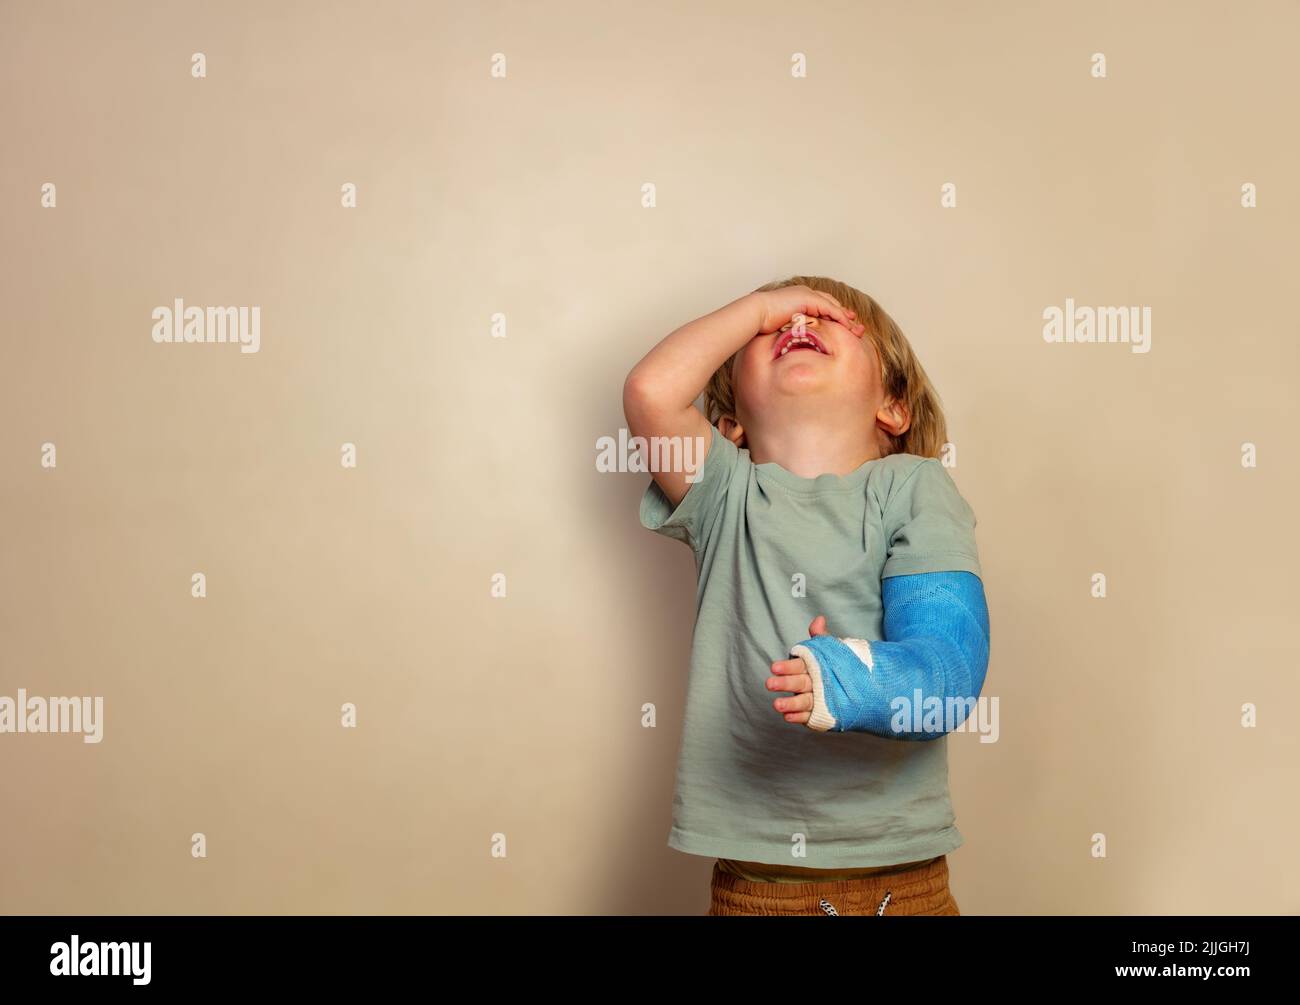 Crying boy with broken hand stand over wall Stock Photo